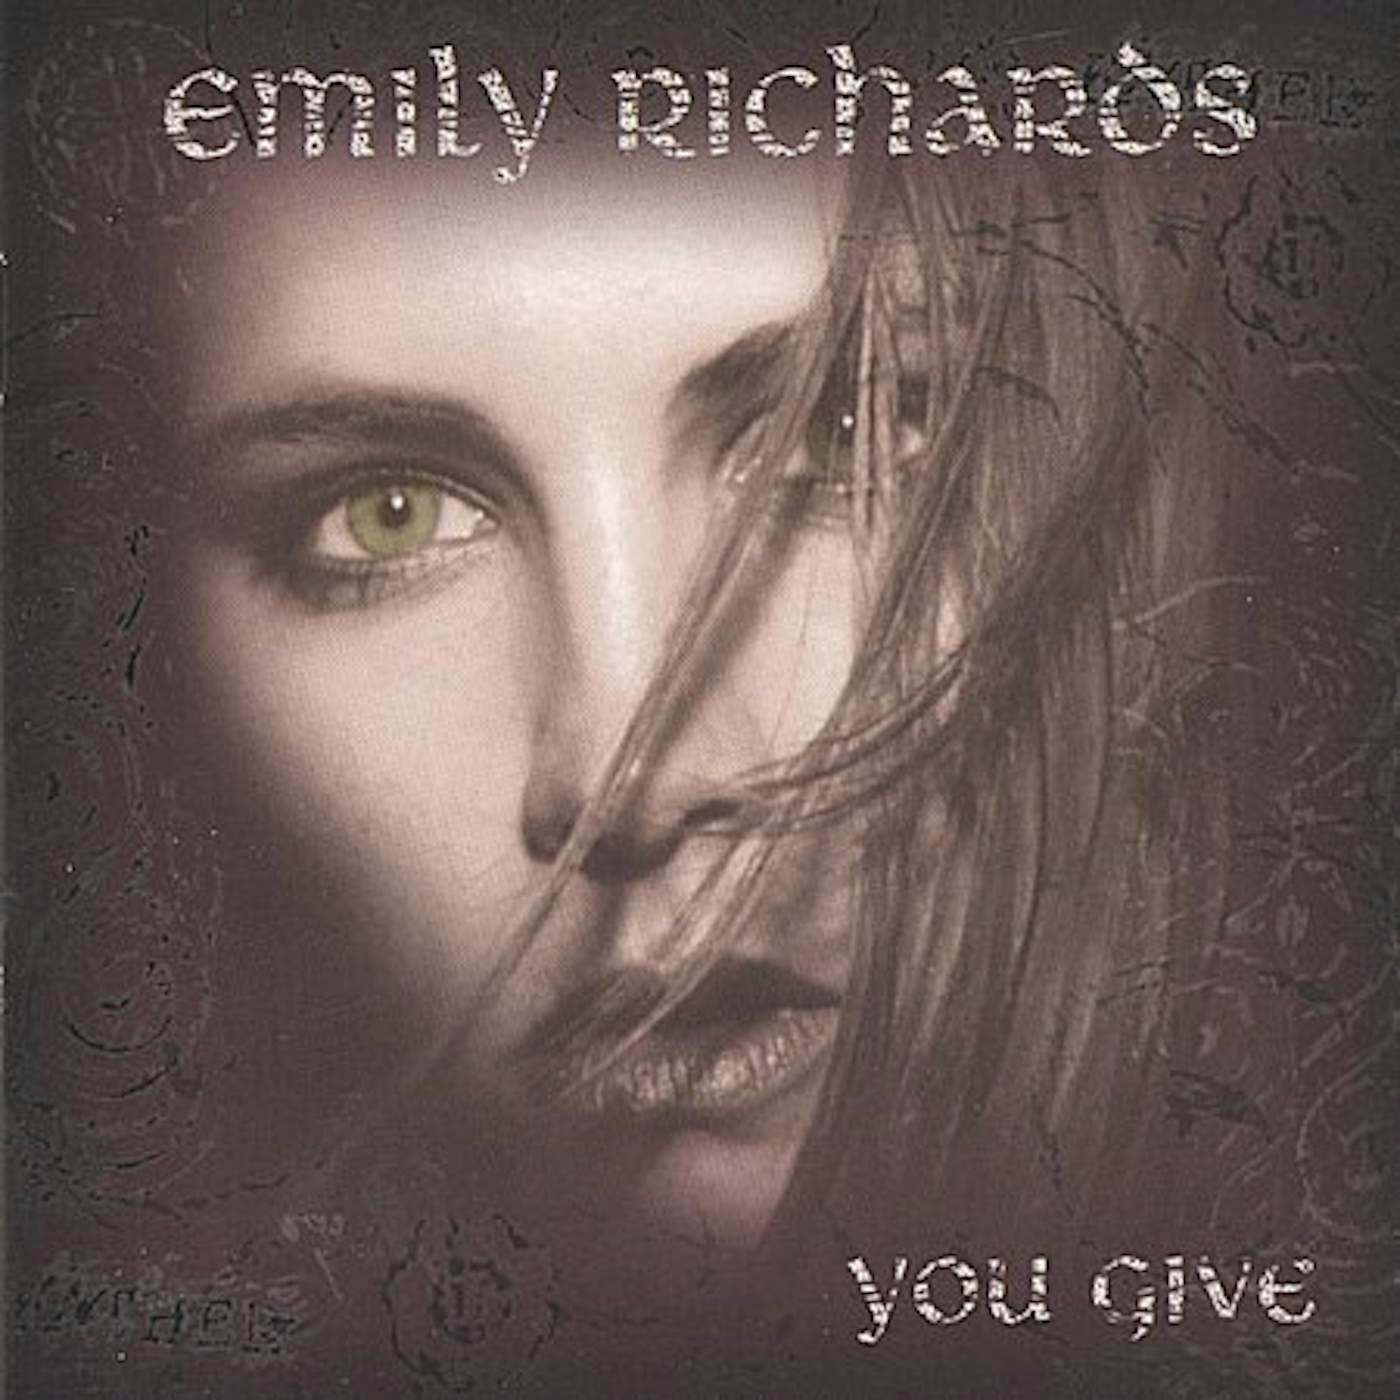 Emily Richards YOU GIVE CD